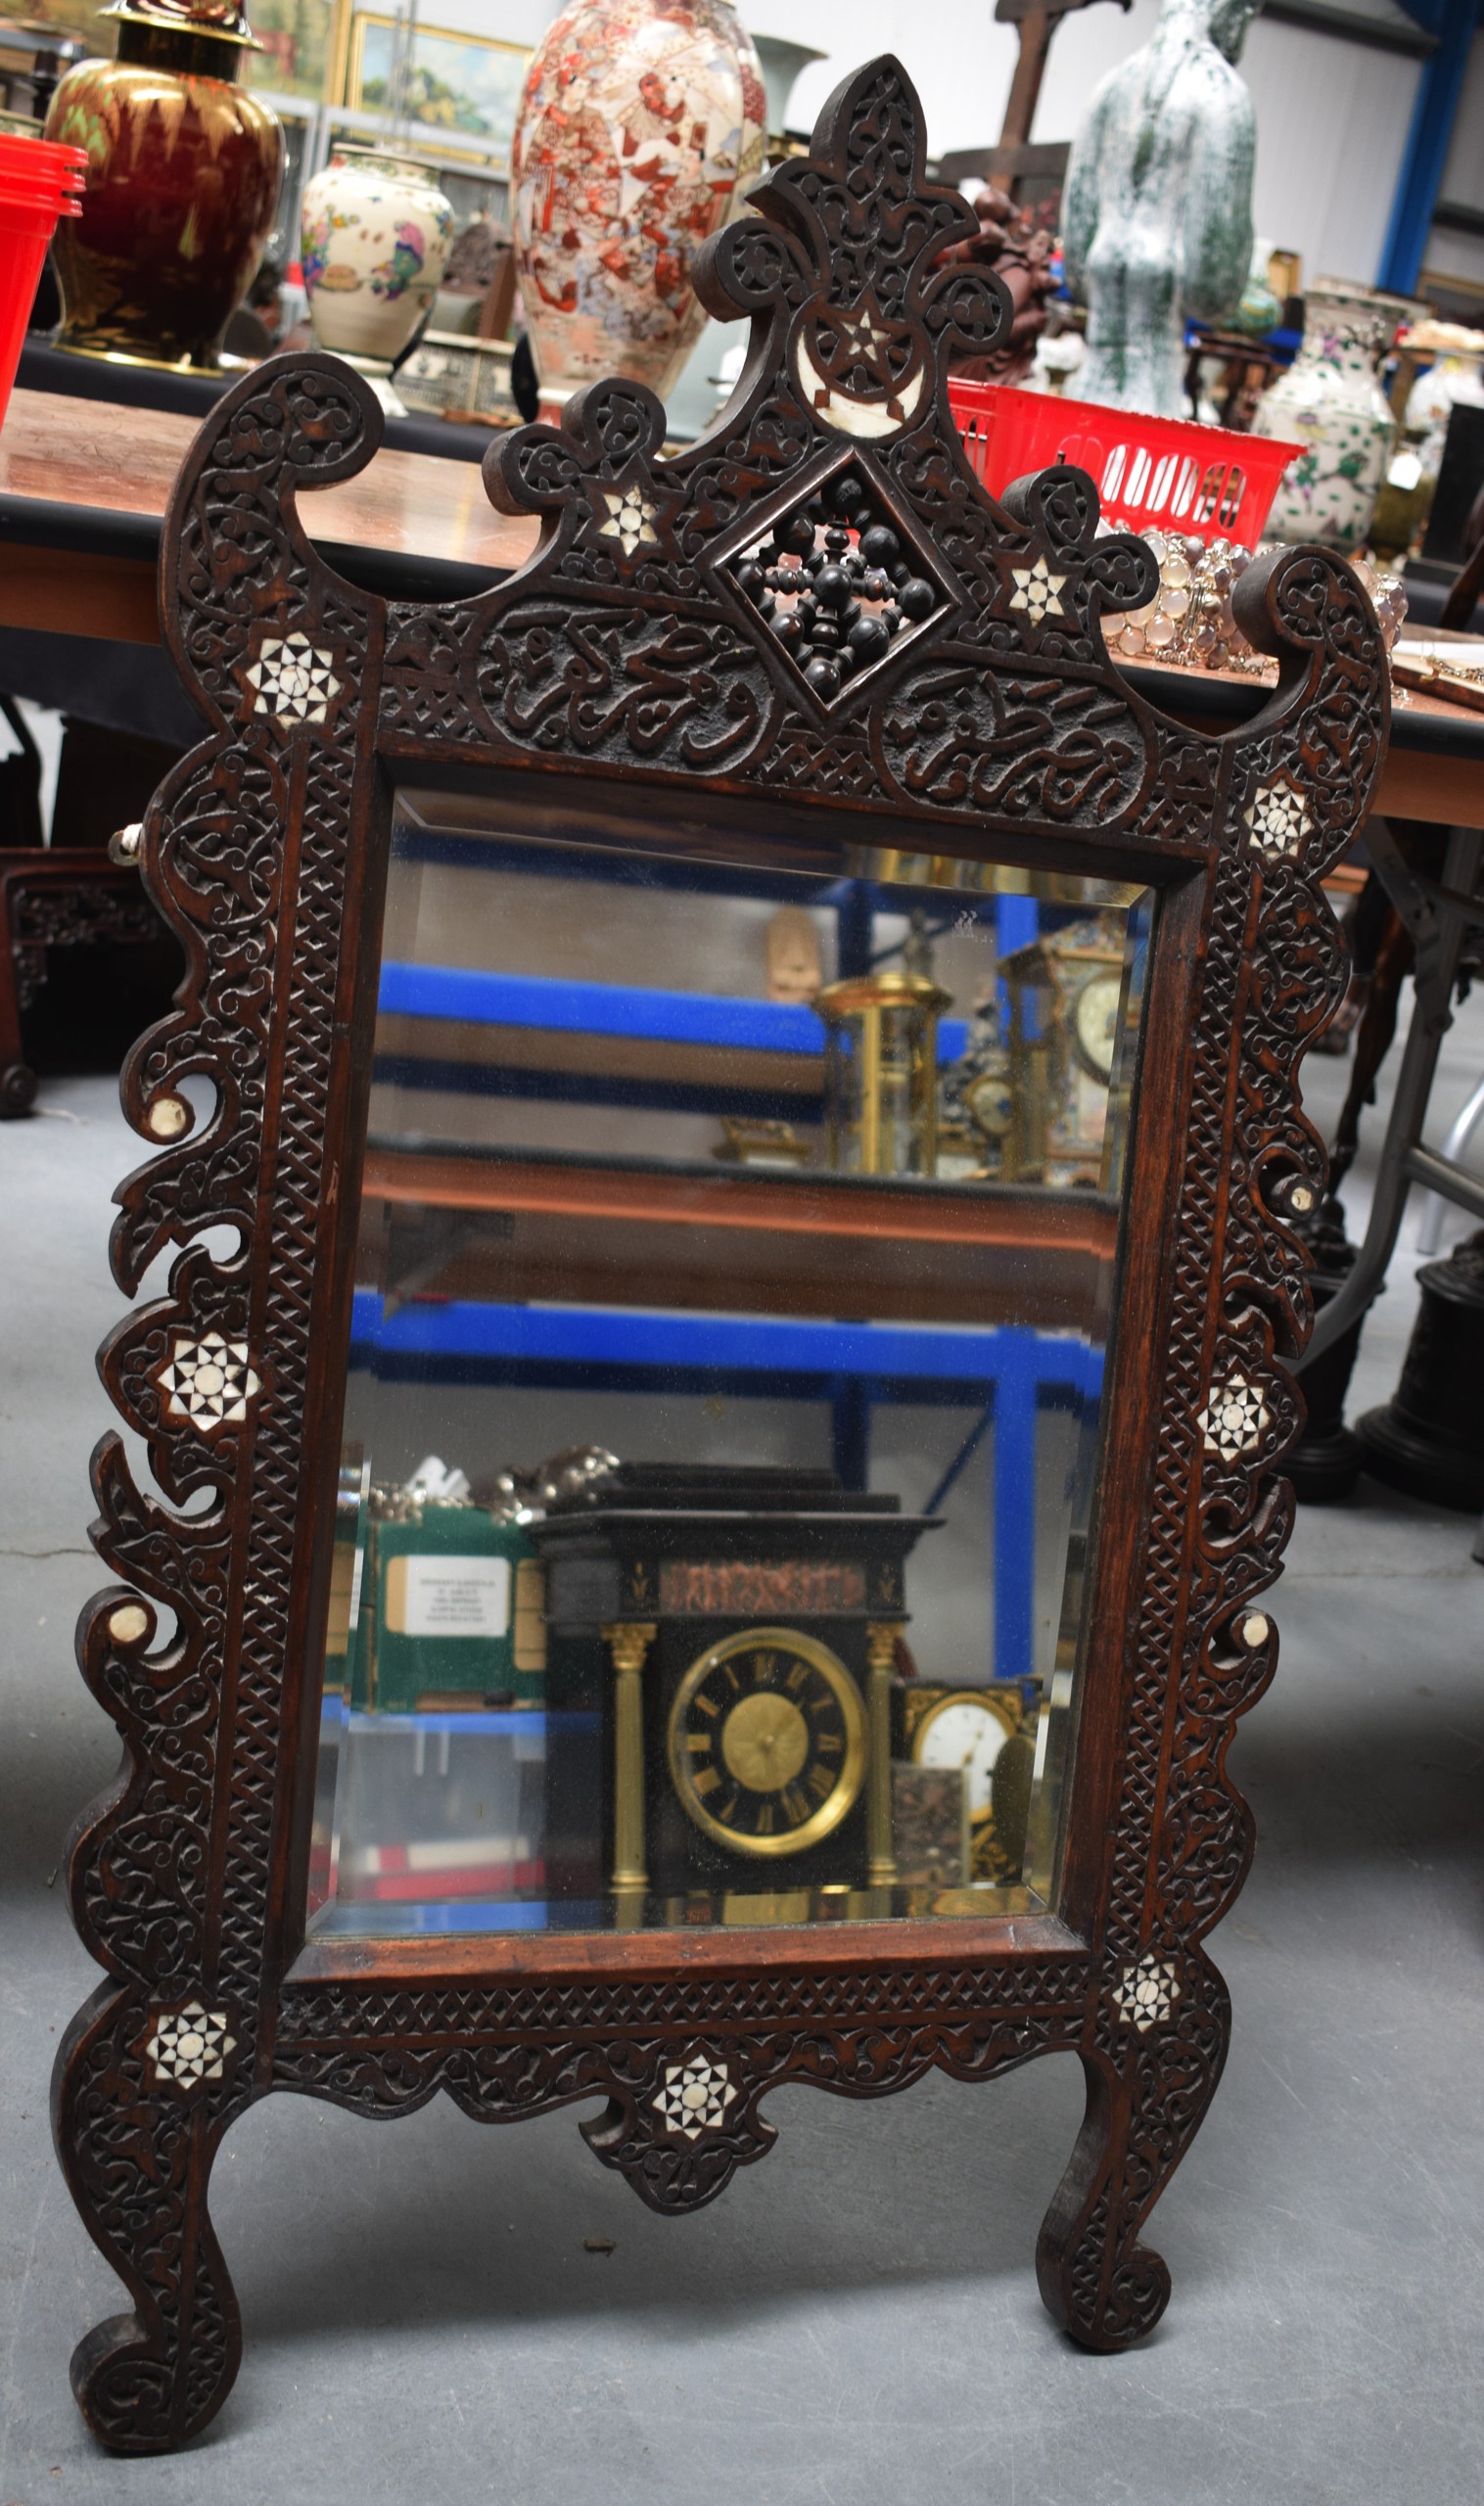 A LARGE LIBERTY~S TYPE HARWOOD SHELL INLAID MIRROR carved with calligraphy. 56 cm x 102 cm. Good